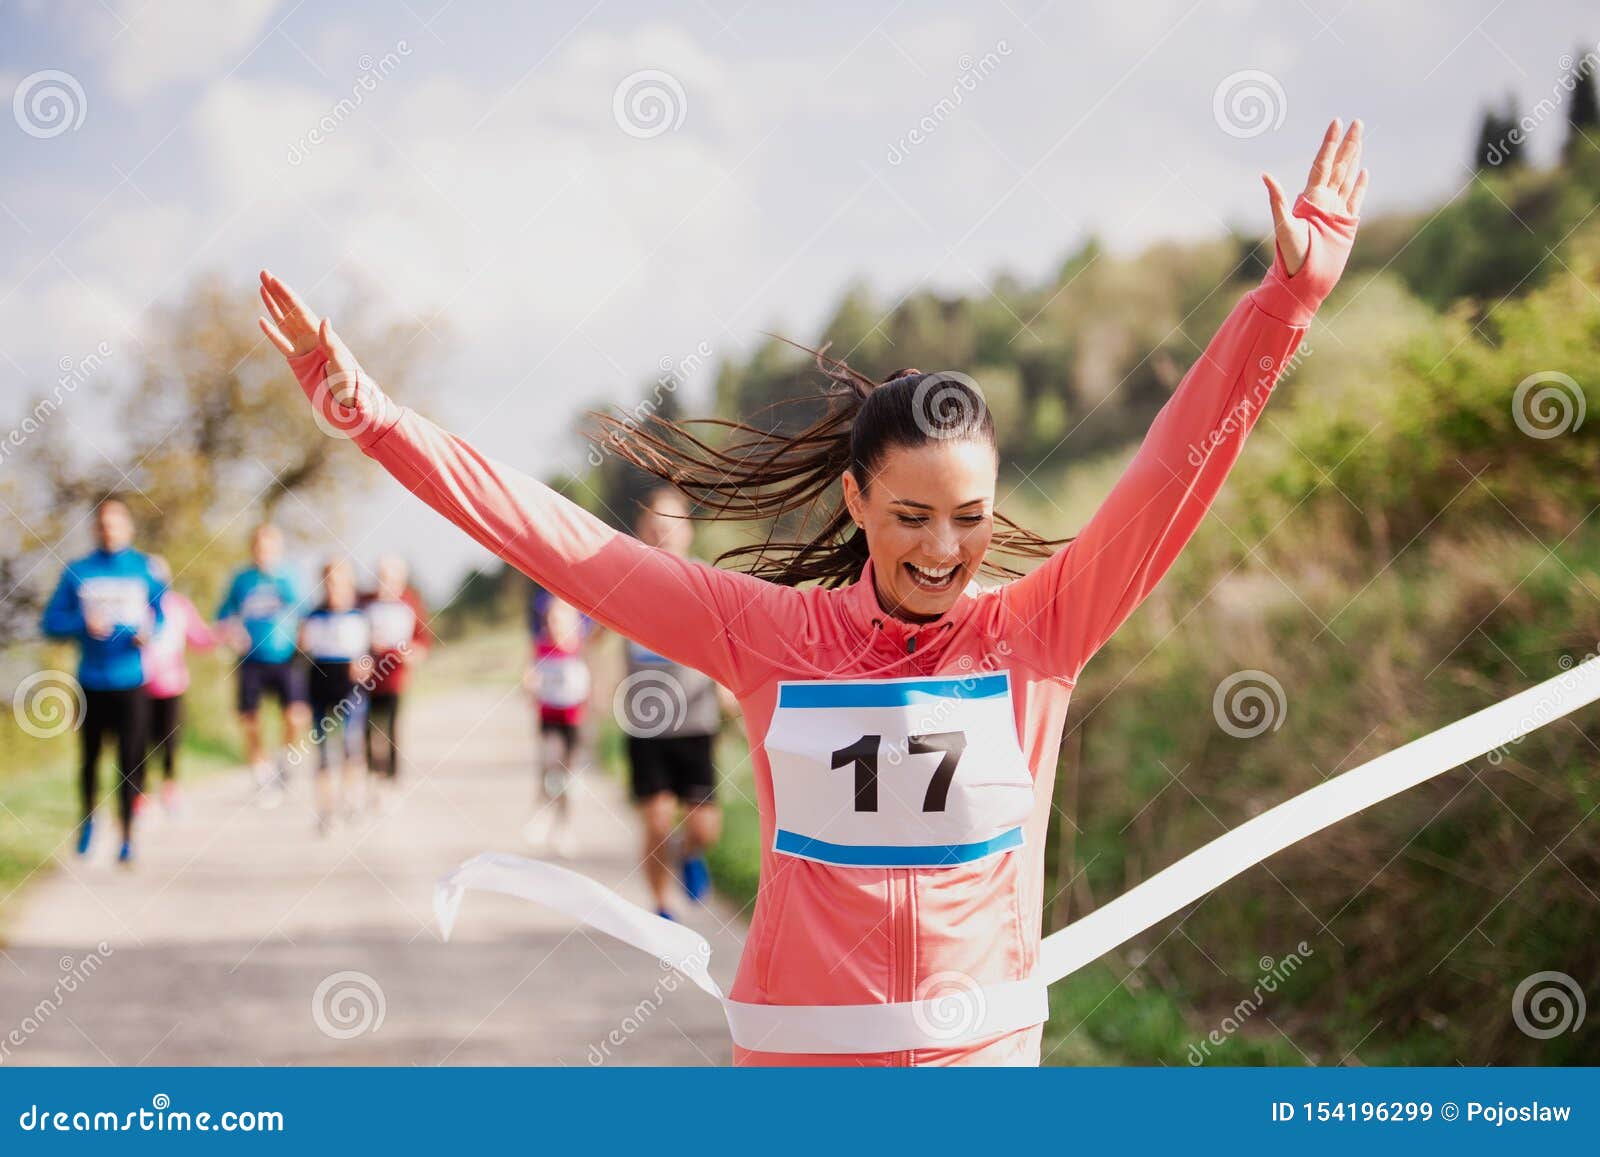 young woman runner crossing finish line in a race competition in nature.